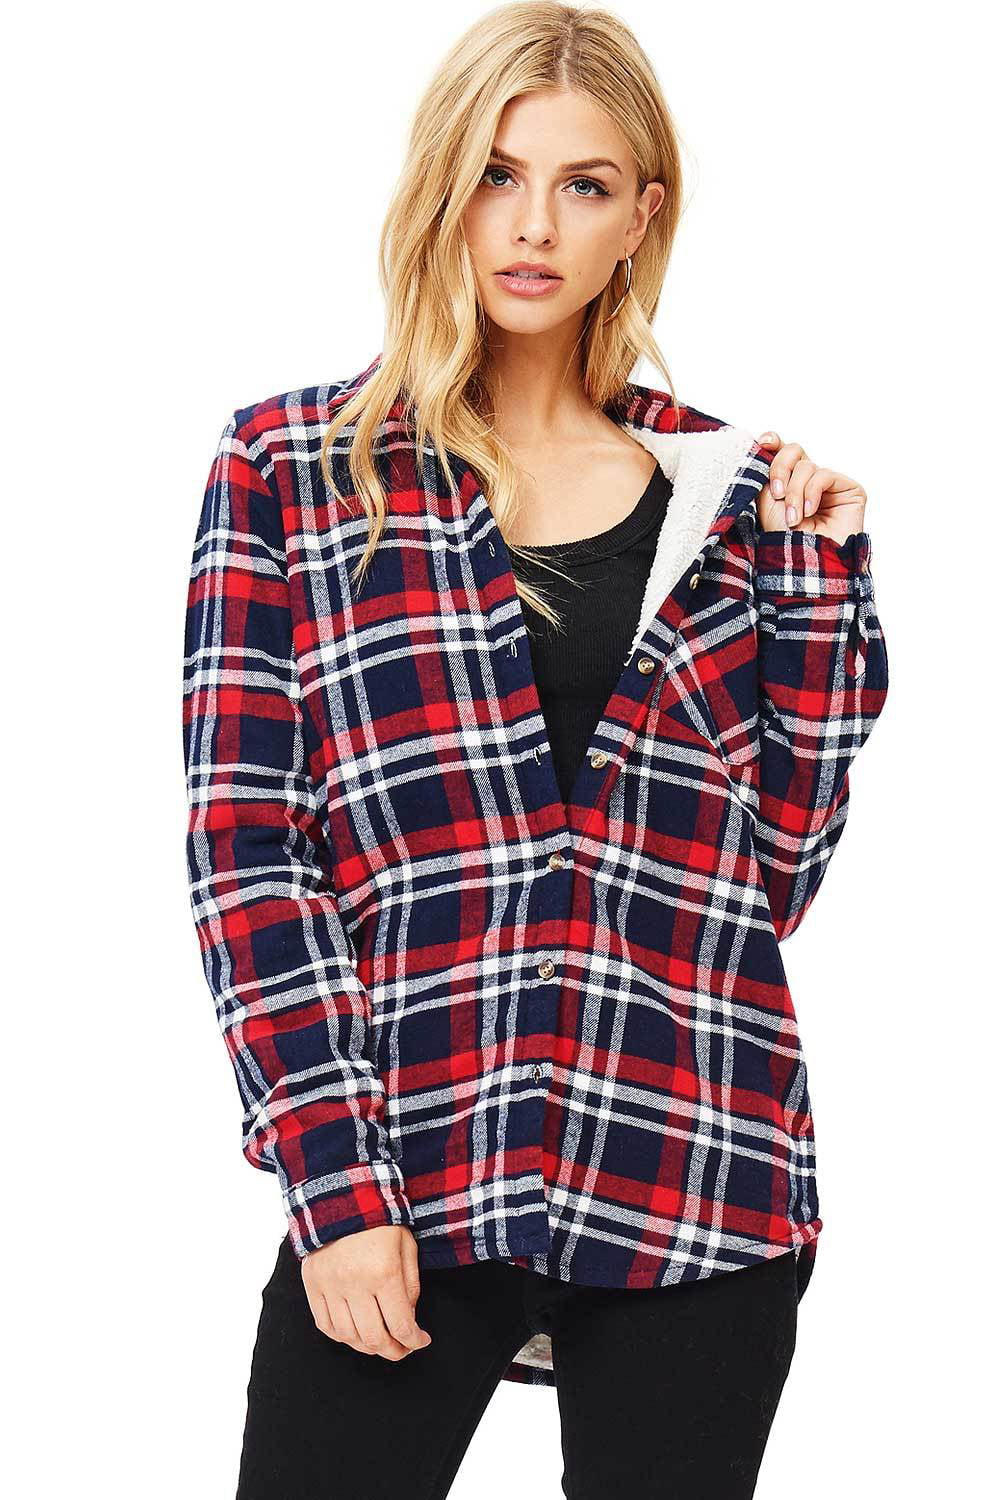 Ambiance Apparel - Ambiance Apparel Women's Fleece Lined Flannel Button ...